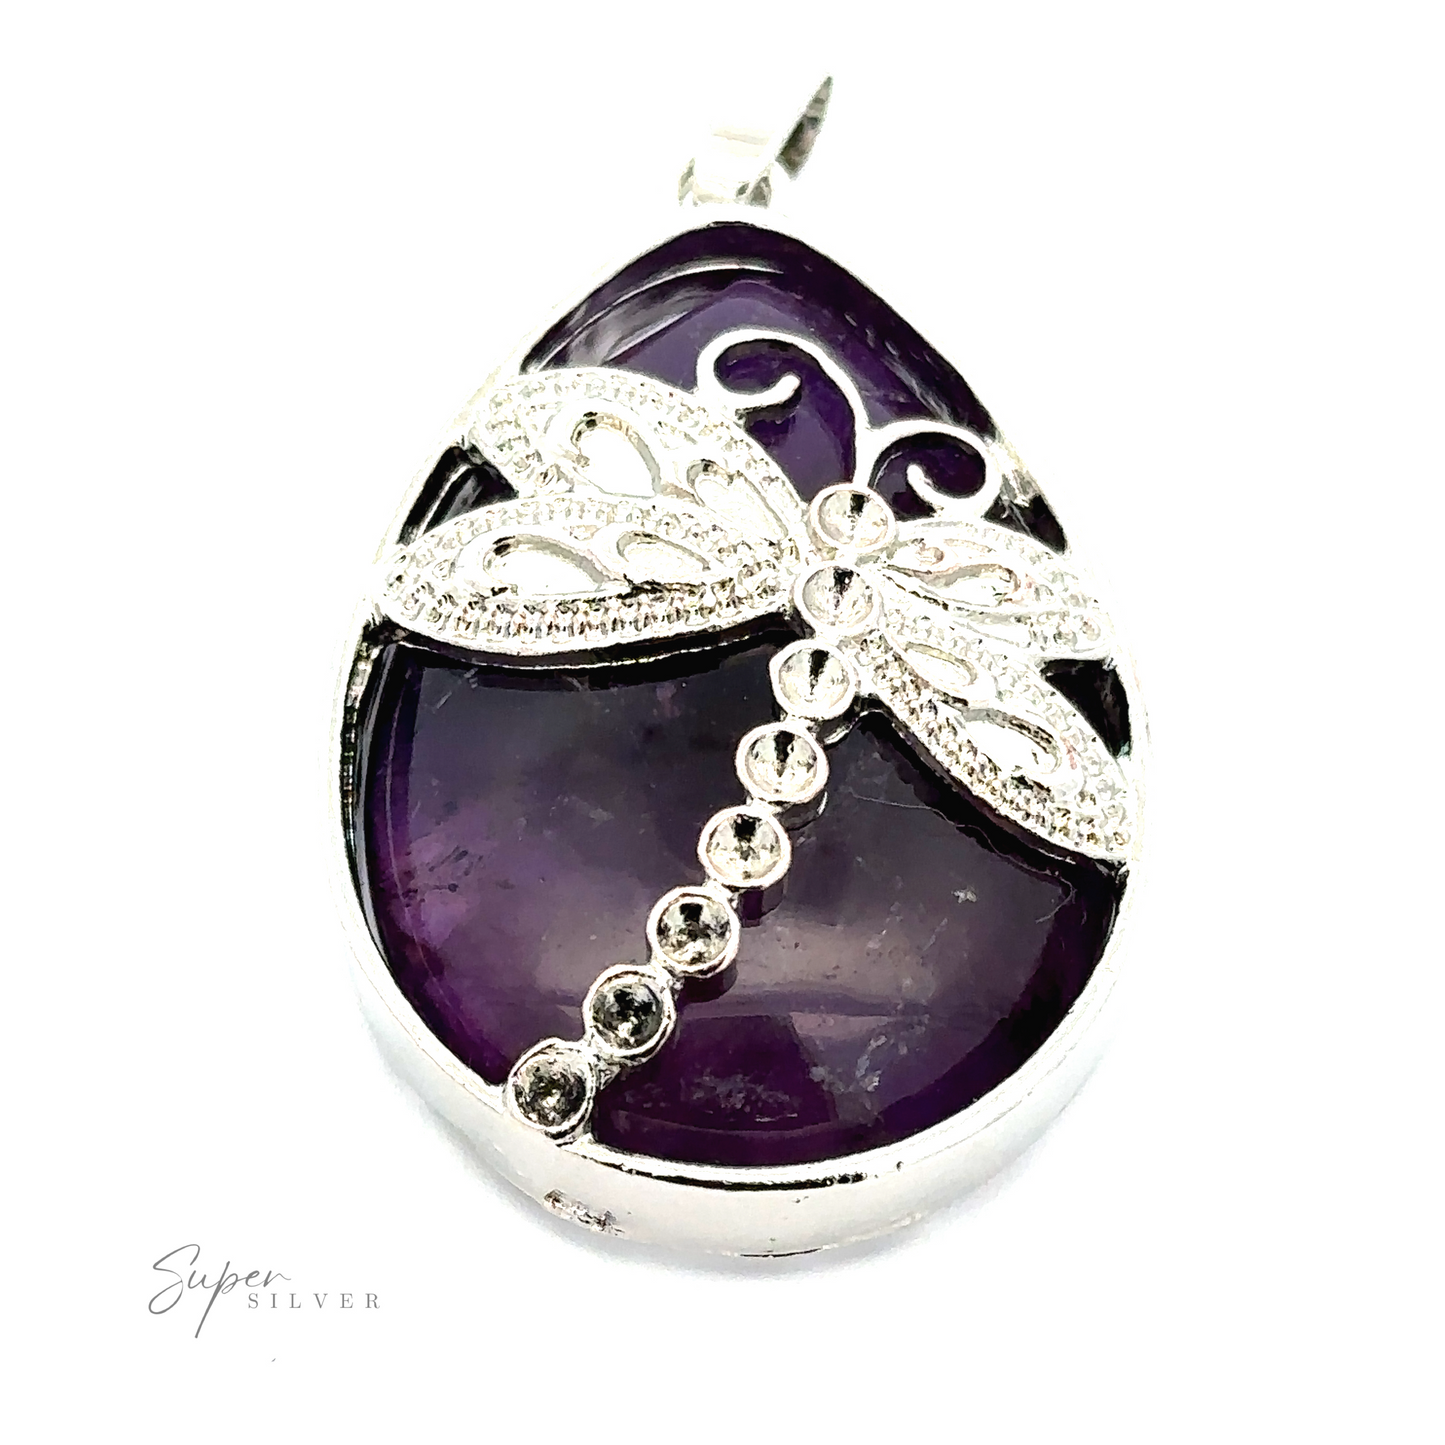 
                  
                    A Teardrop Stone pendant with Dragonfly with intricate detailing is set against a teardrop-shaped Amethyst gemstone. The pendant is branded "Super Silver".
                  
                